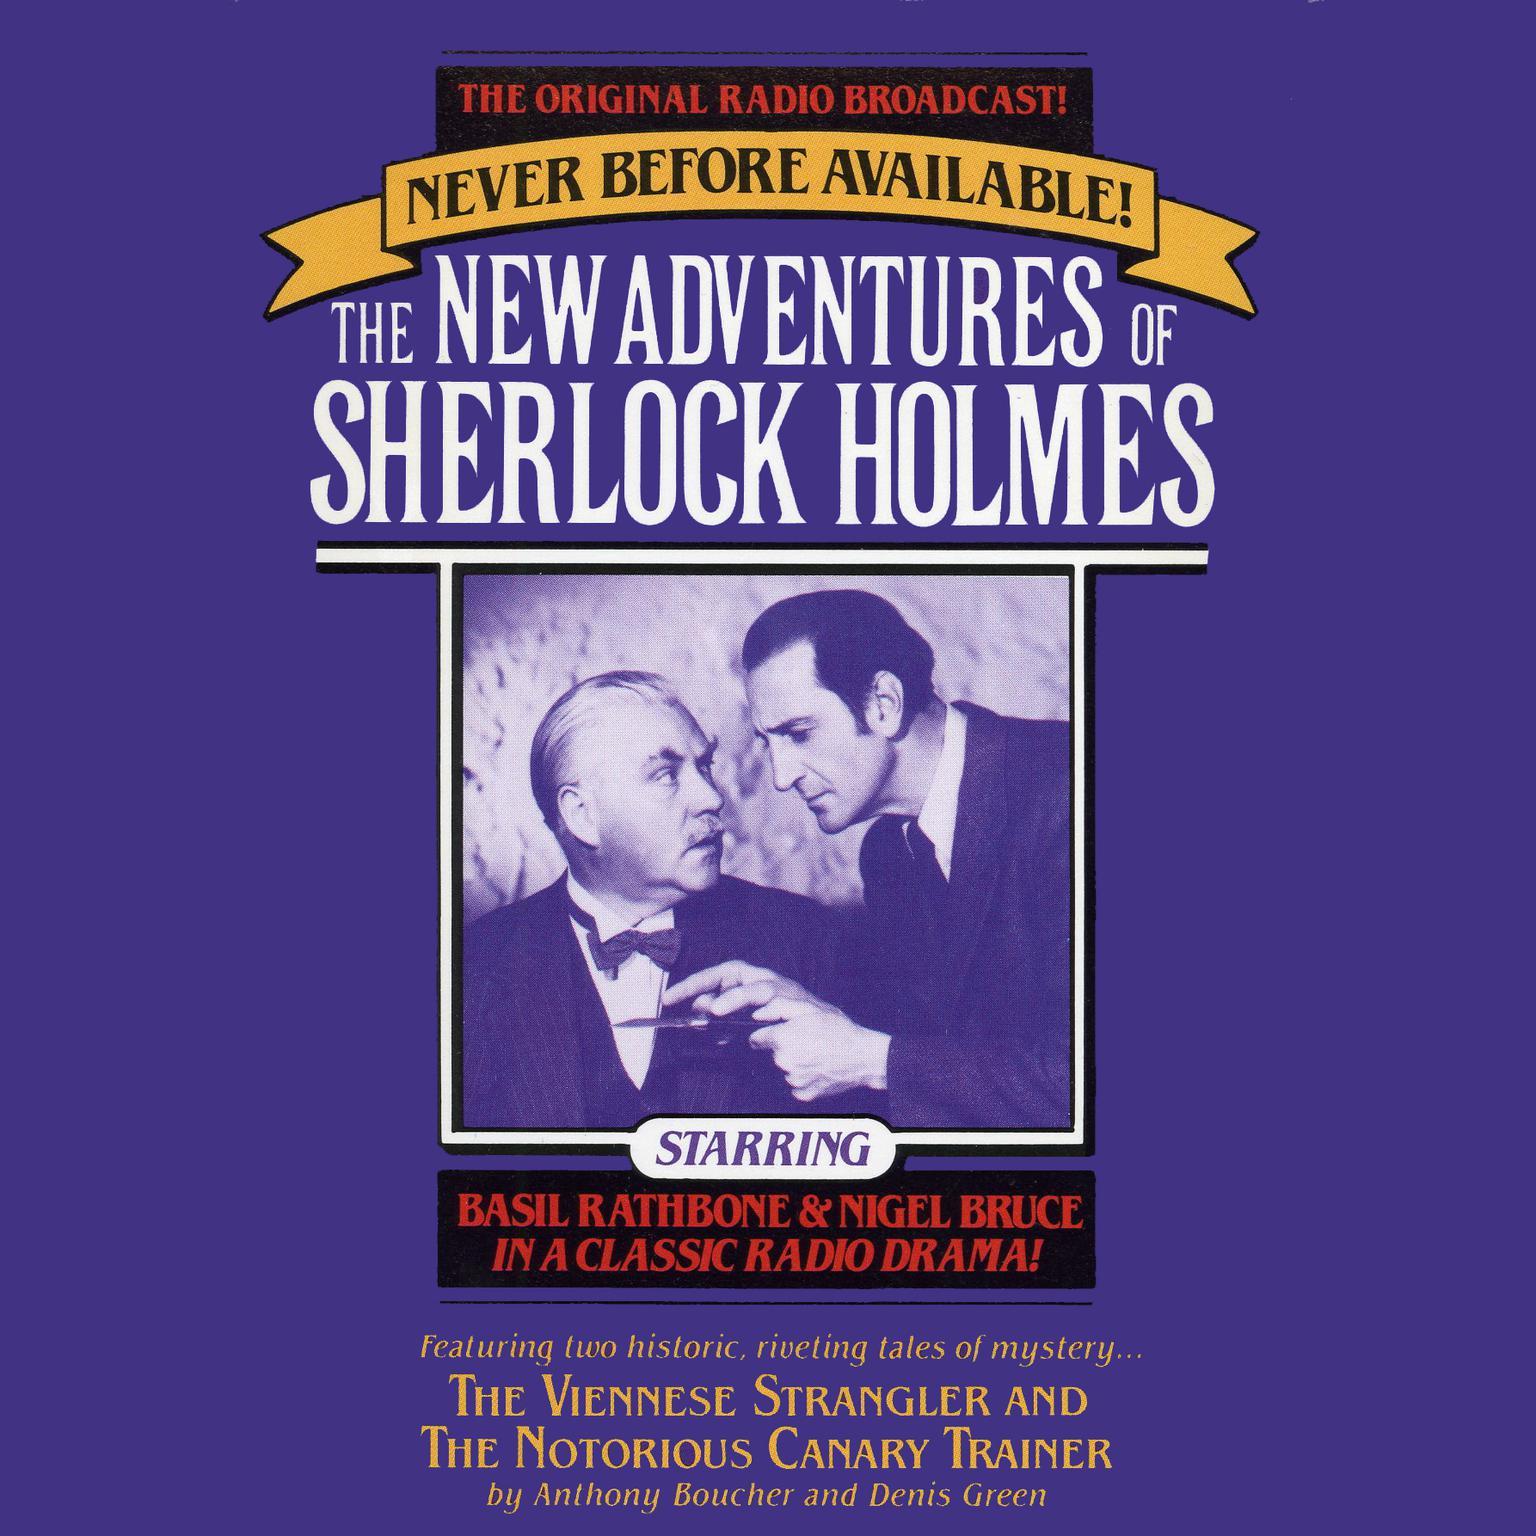 The Viennese Strangler and The Notorious Canary Trainer (Abridged): The New Adventures of Sherlock Holmes, Episode 2 Audiobook, by Anthony Boucher